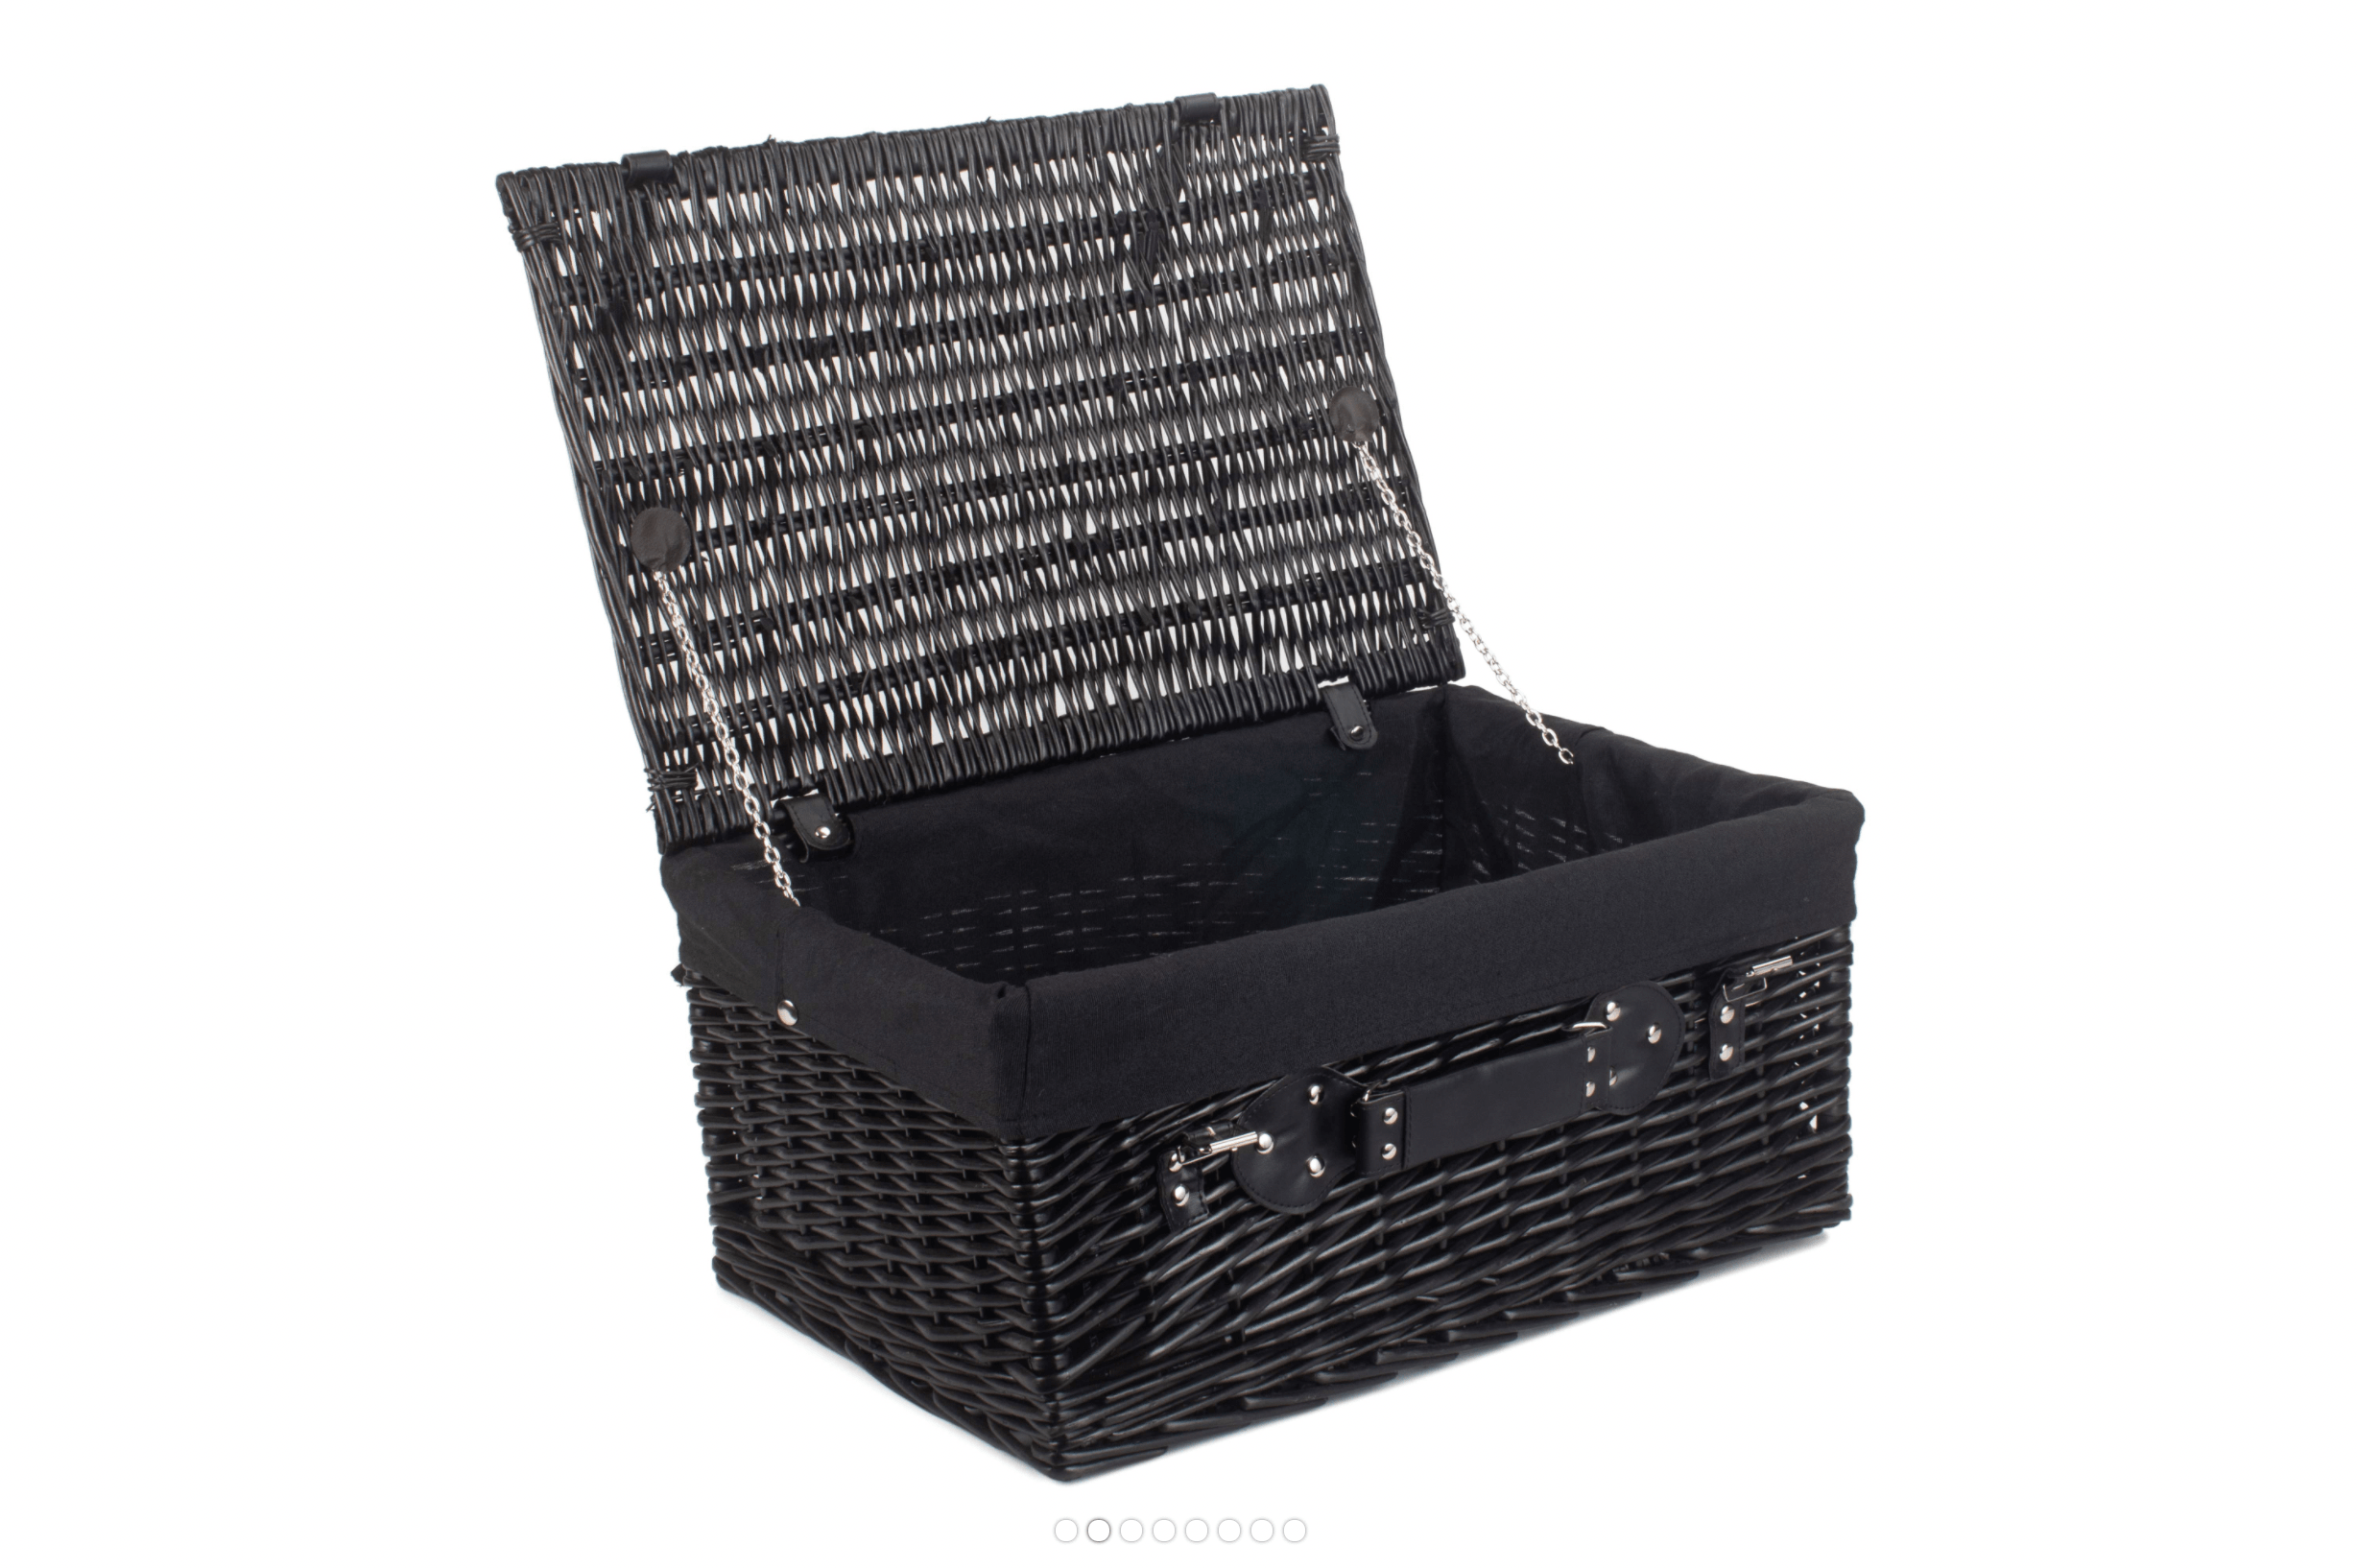 Empty Black Willow Hamper with Black Lining 16" - Celebration Cheeses